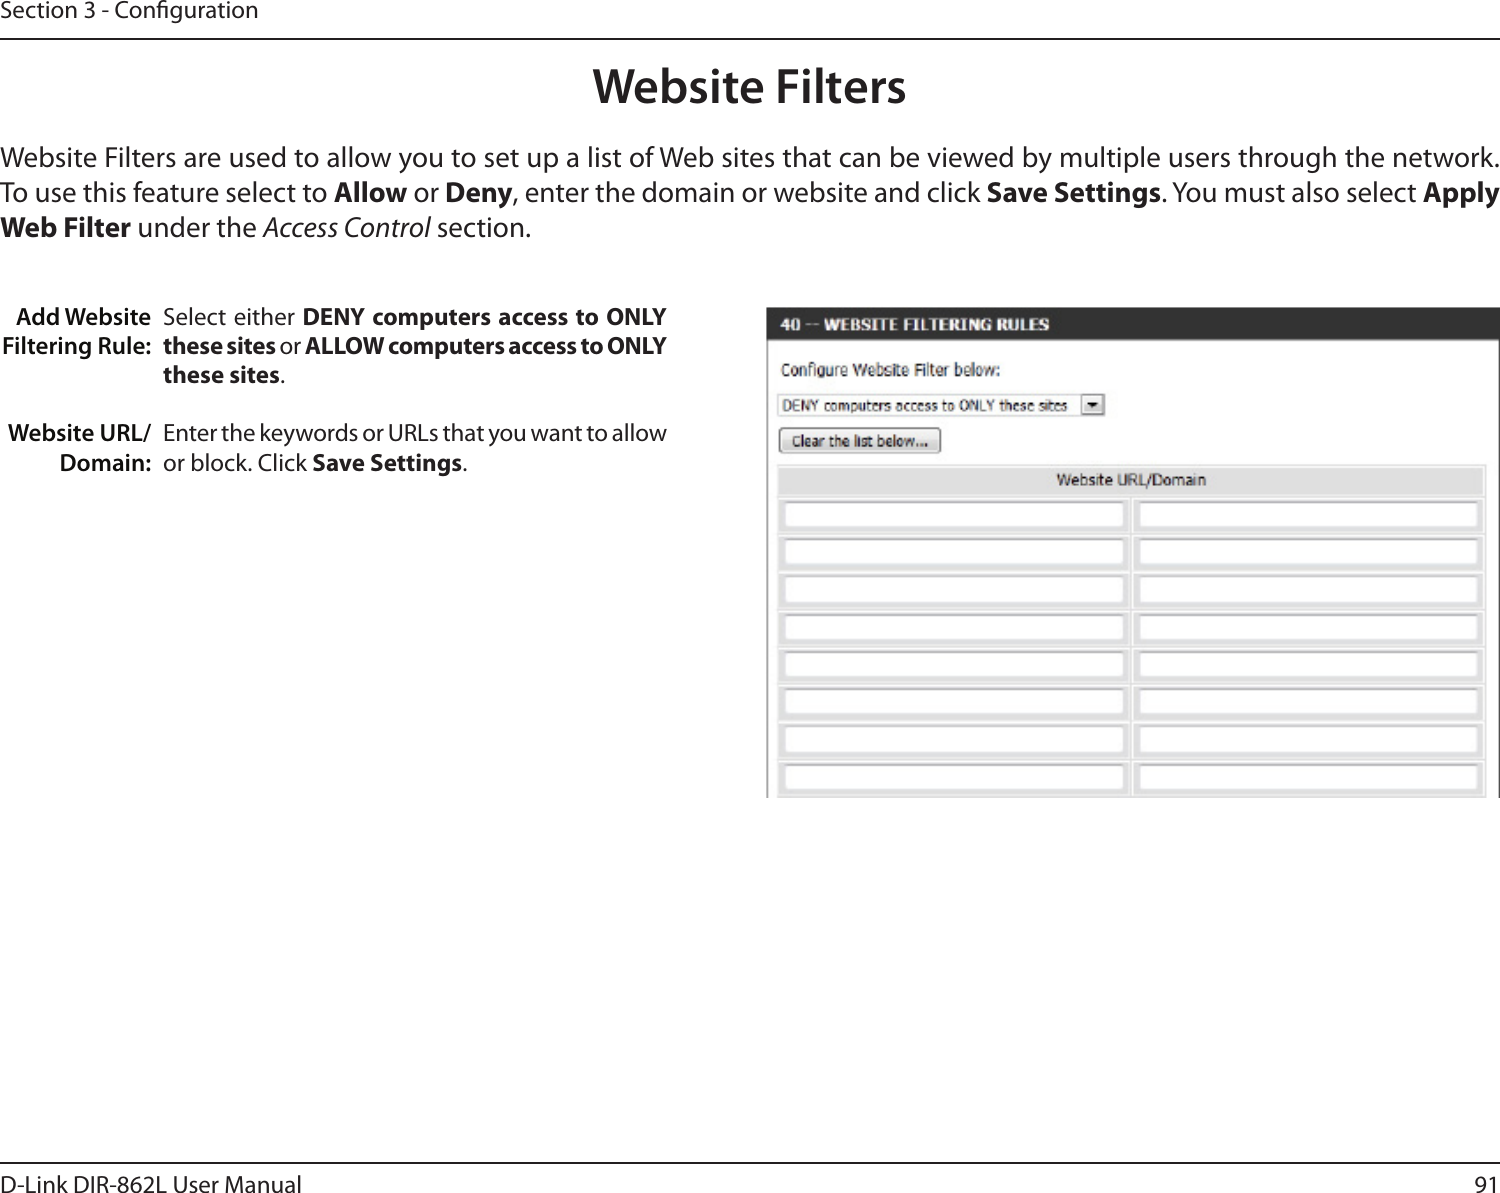 91D-Link DIR-862L User ManualSection 3 - CongurationAdd Website Filtering Rule:Website URL/Domain:Website FiltersSelect either DENY computers access to ONLY these sites or ALLOW computers access to ONLY these sites.Enter the keywords or URLs that you want to allow or block. Click Save Settings.Website Filters are used to allow you to set up a list of Web sites that can be viewed by multiple users through the network. To use this feature select to Allow or Deny, enter the domain or website and click Save Settings. You must also select Apply Web Filter under the Access Control section.